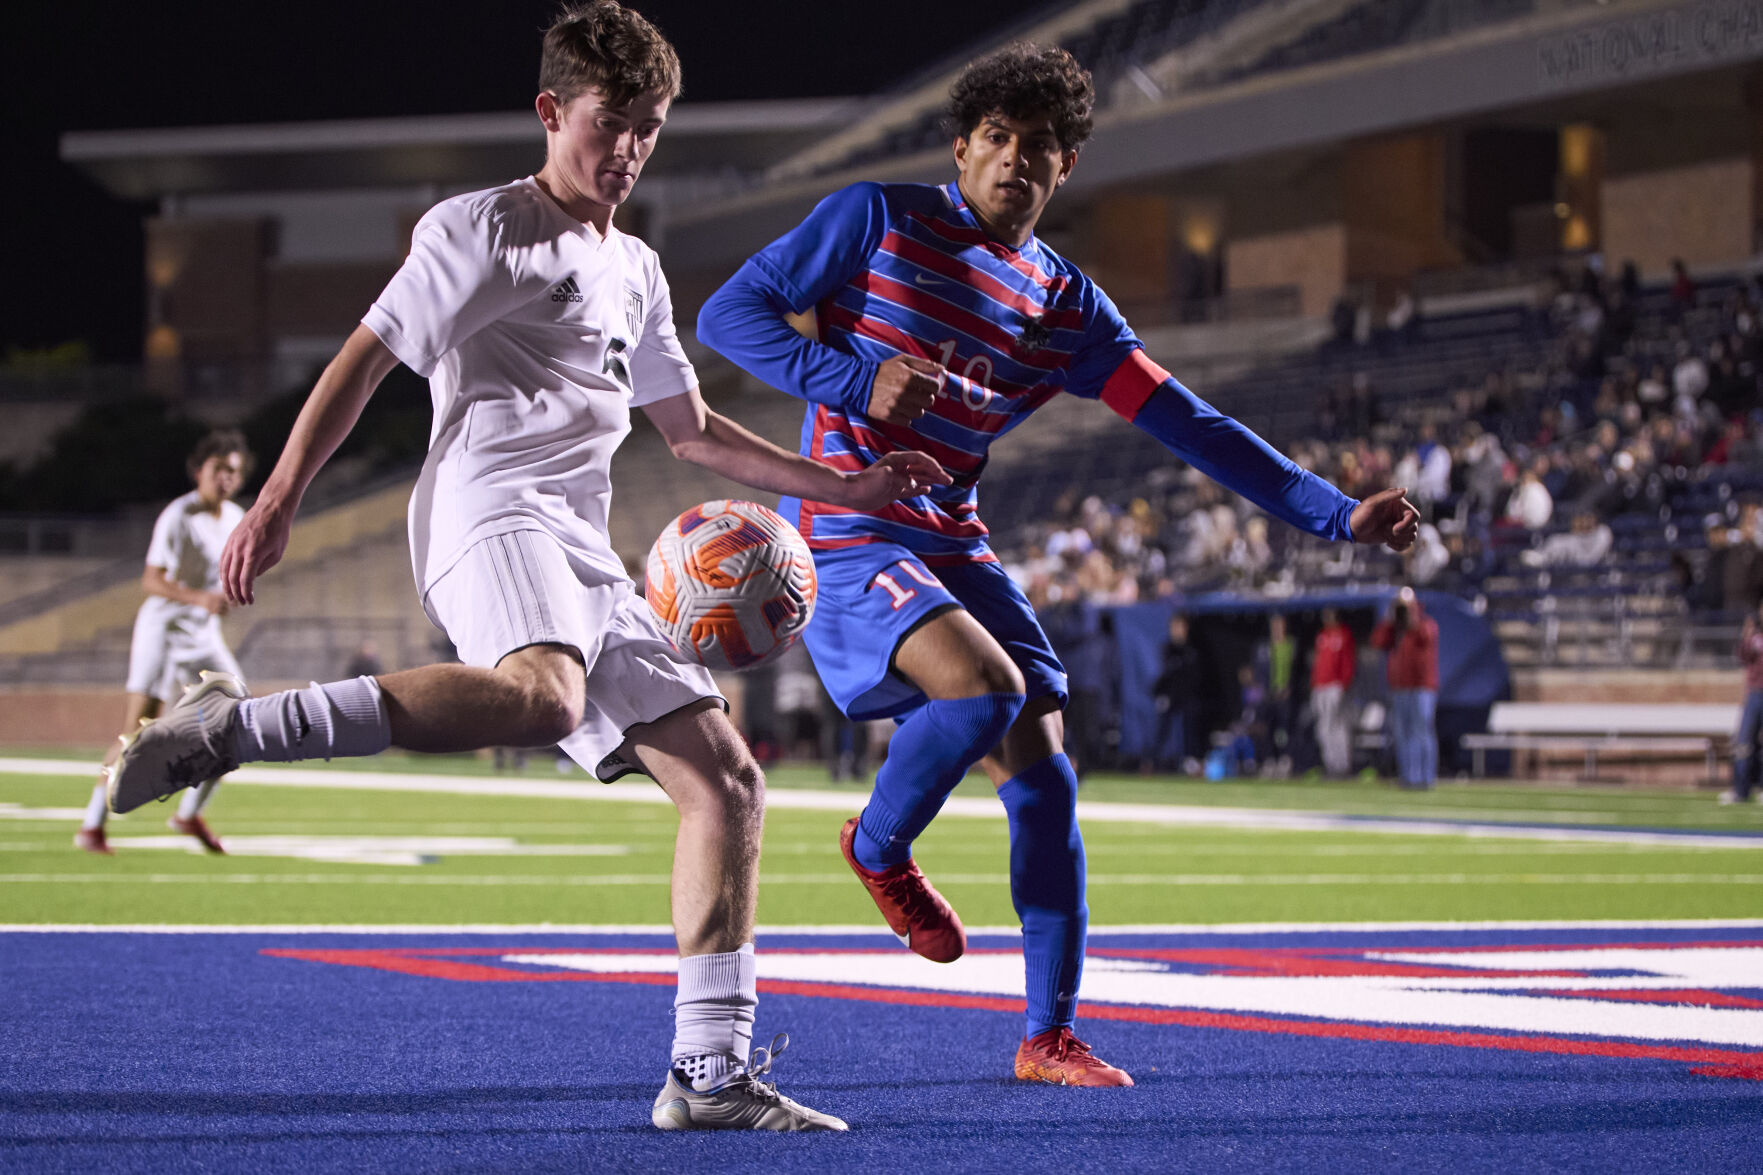 UIL boys soccer playoffs: See when and where local teams are playing in the bi-district round